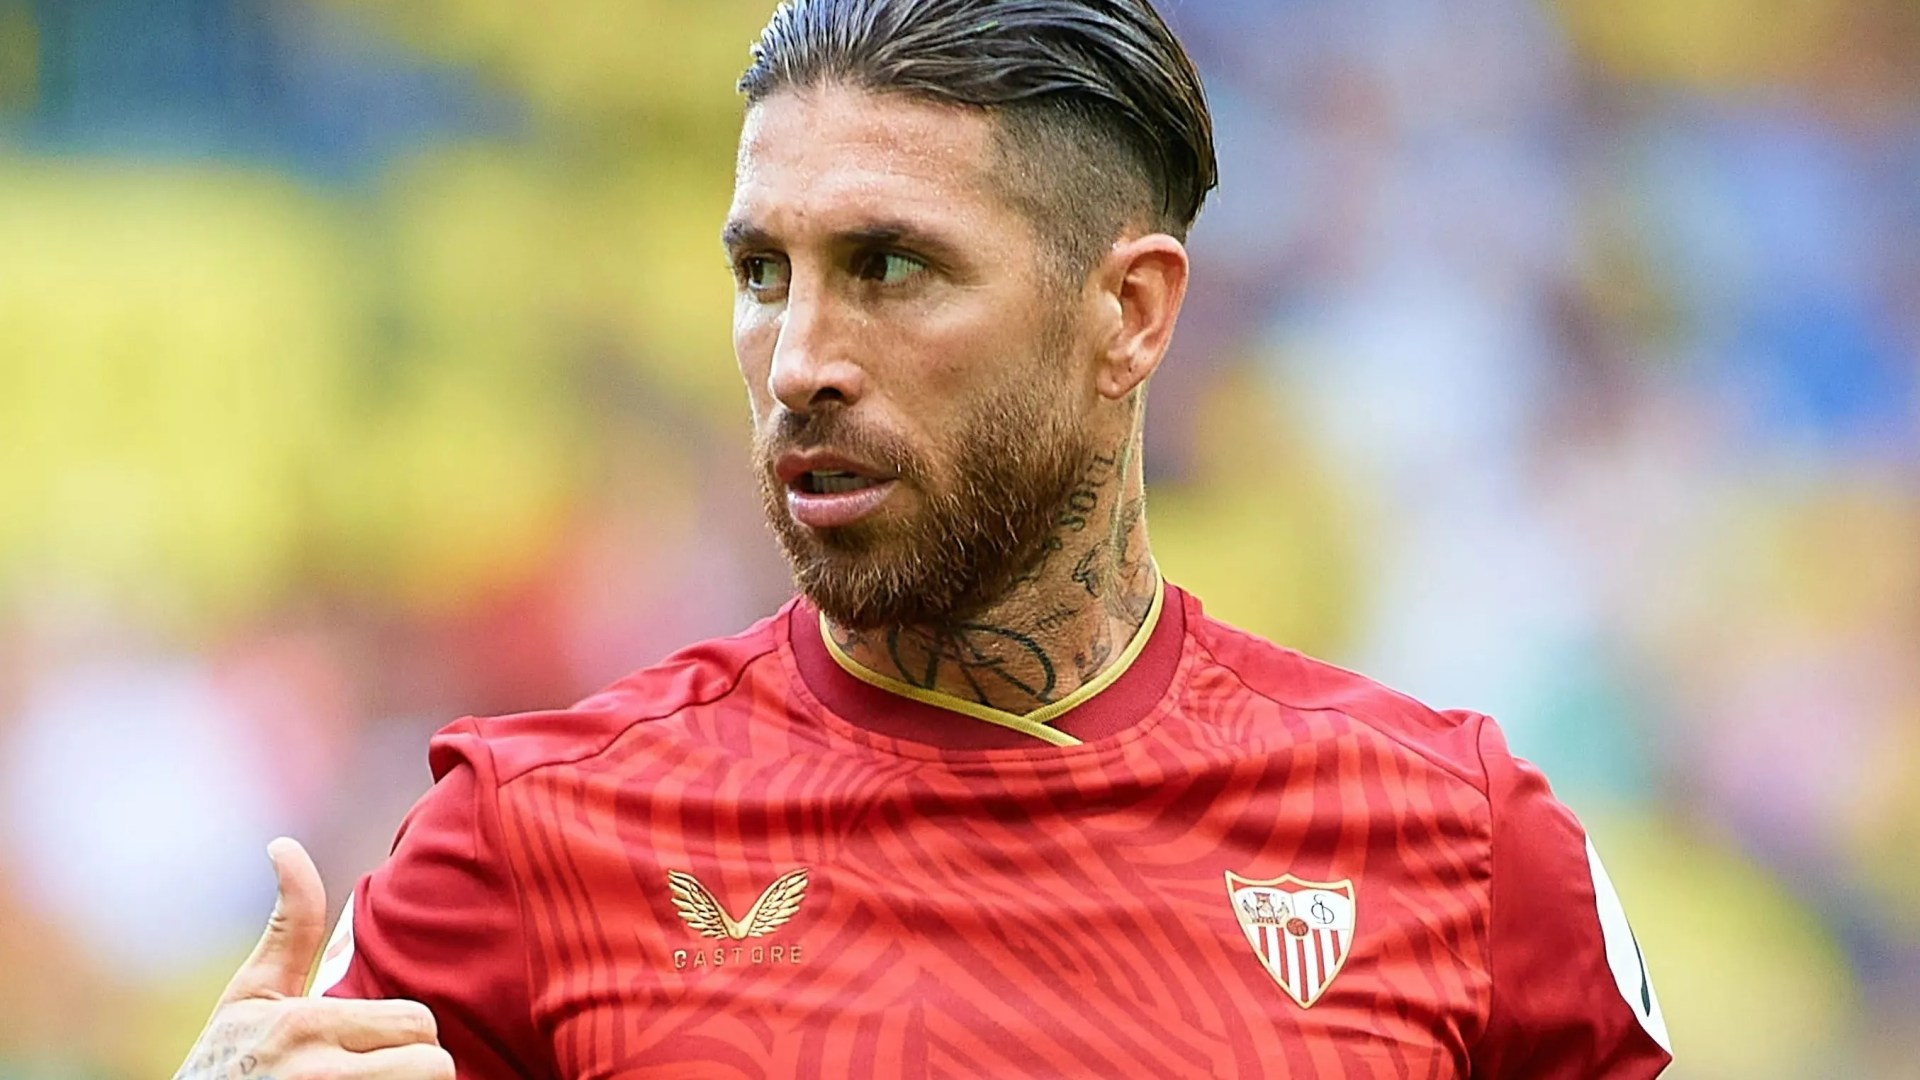 Sergio Ramos, 38, set for free transfer to team that doesn’t exist yet after emotional season at boyhood club Sevilla [Video]